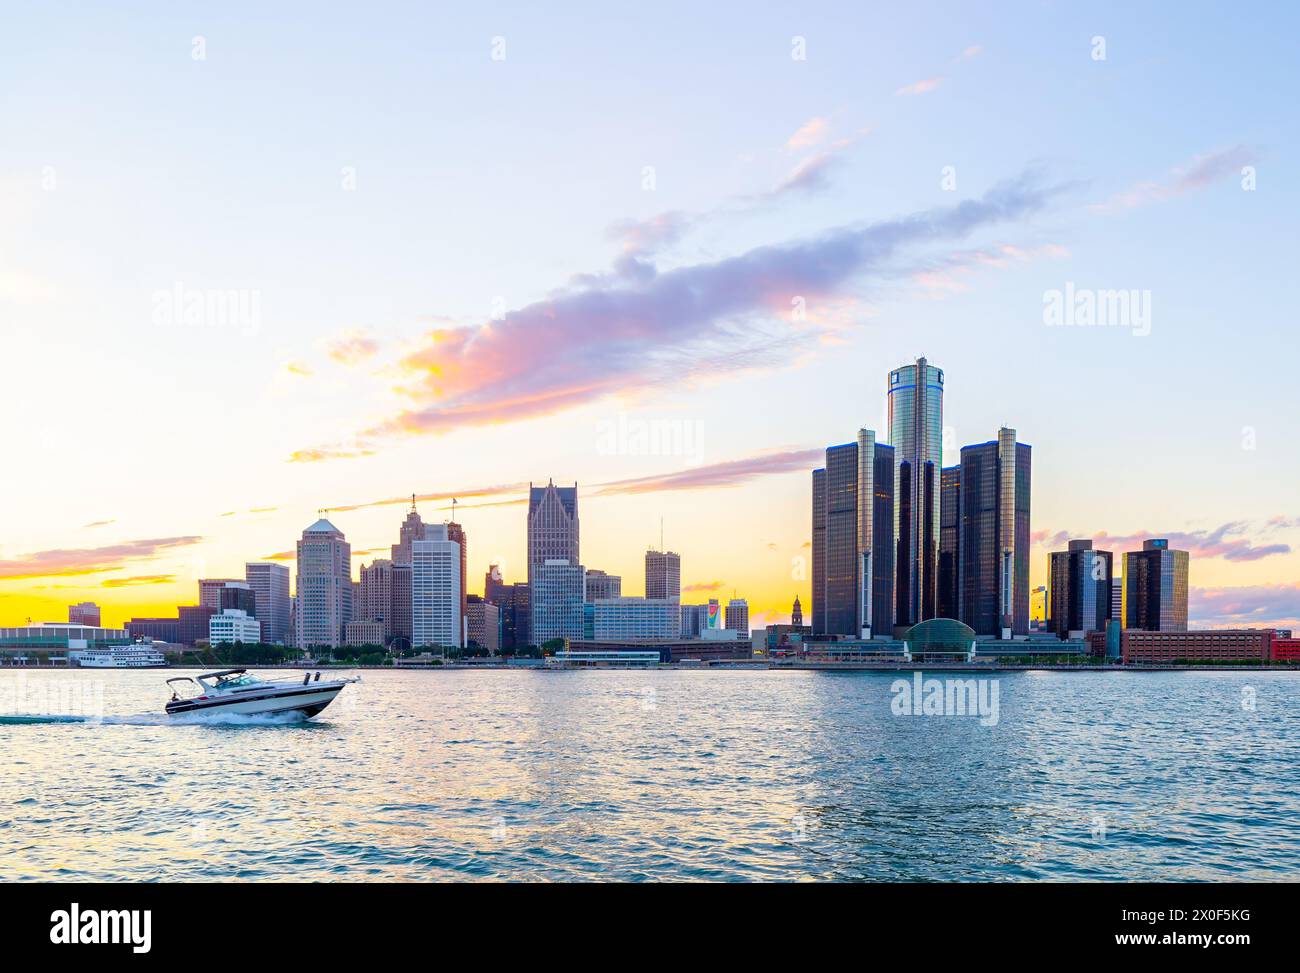 The Detroit city skyline, including the Renaissance Center, seen from the Detroit River in Detroit, Michigan, USA. Stock Photo